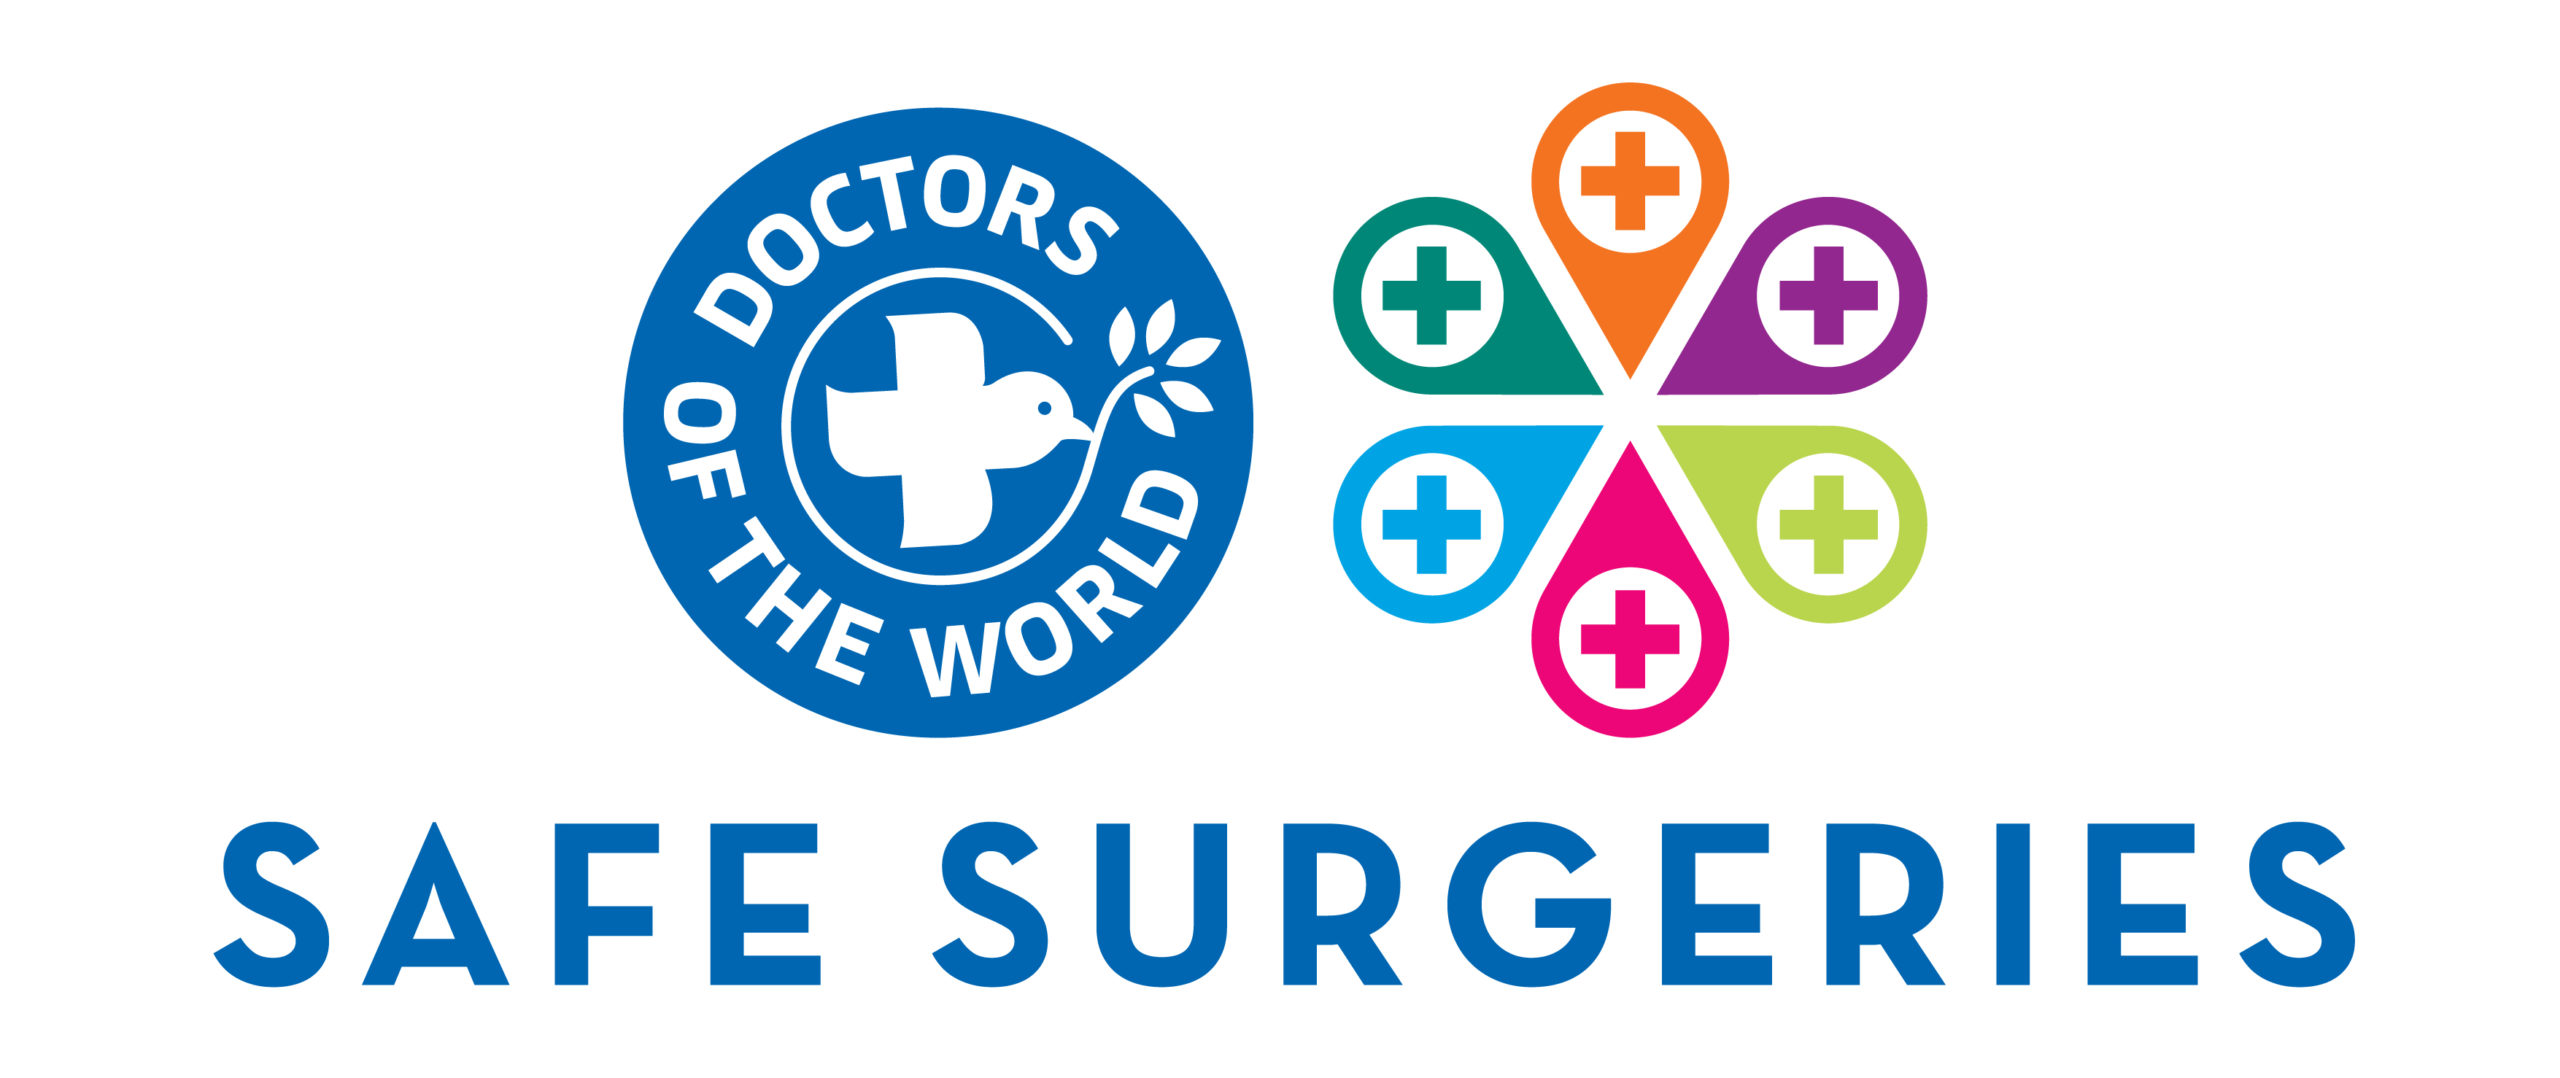 Safe Surgeries, doctors of the world